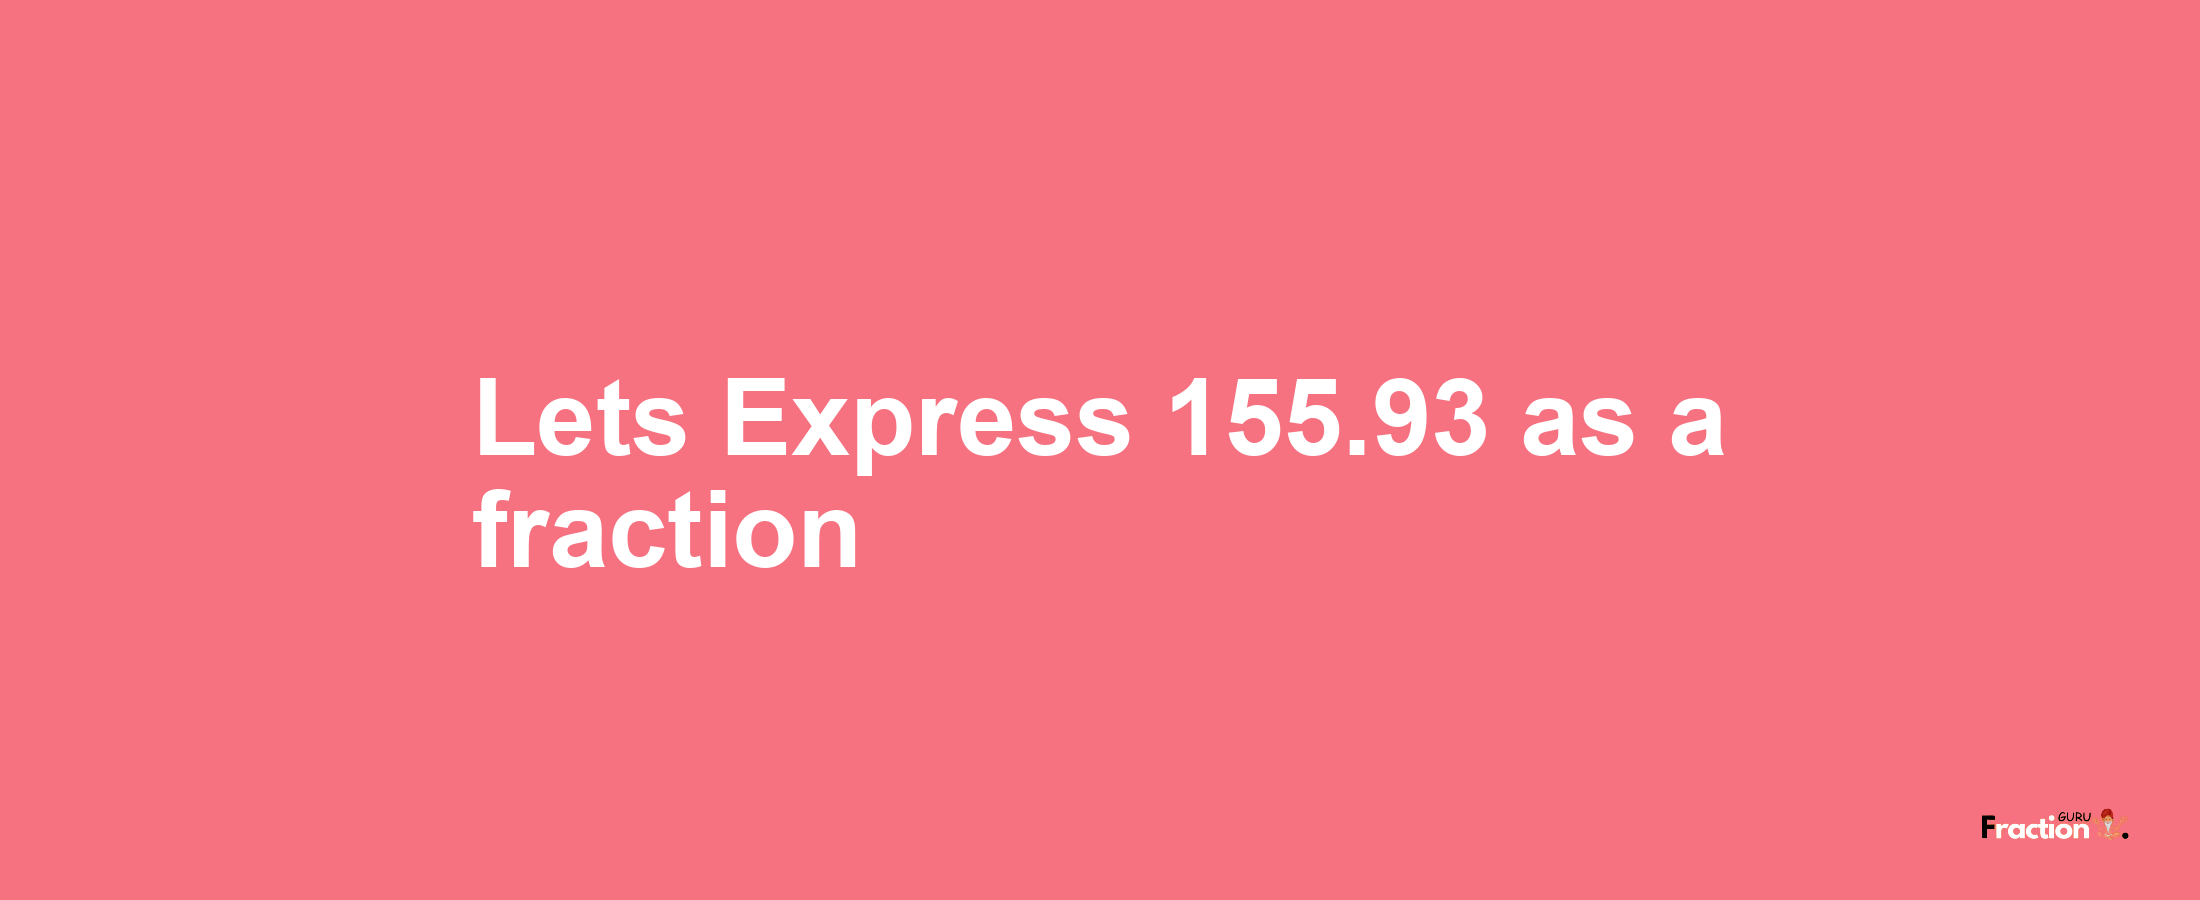 Lets Express 155.93 as afraction